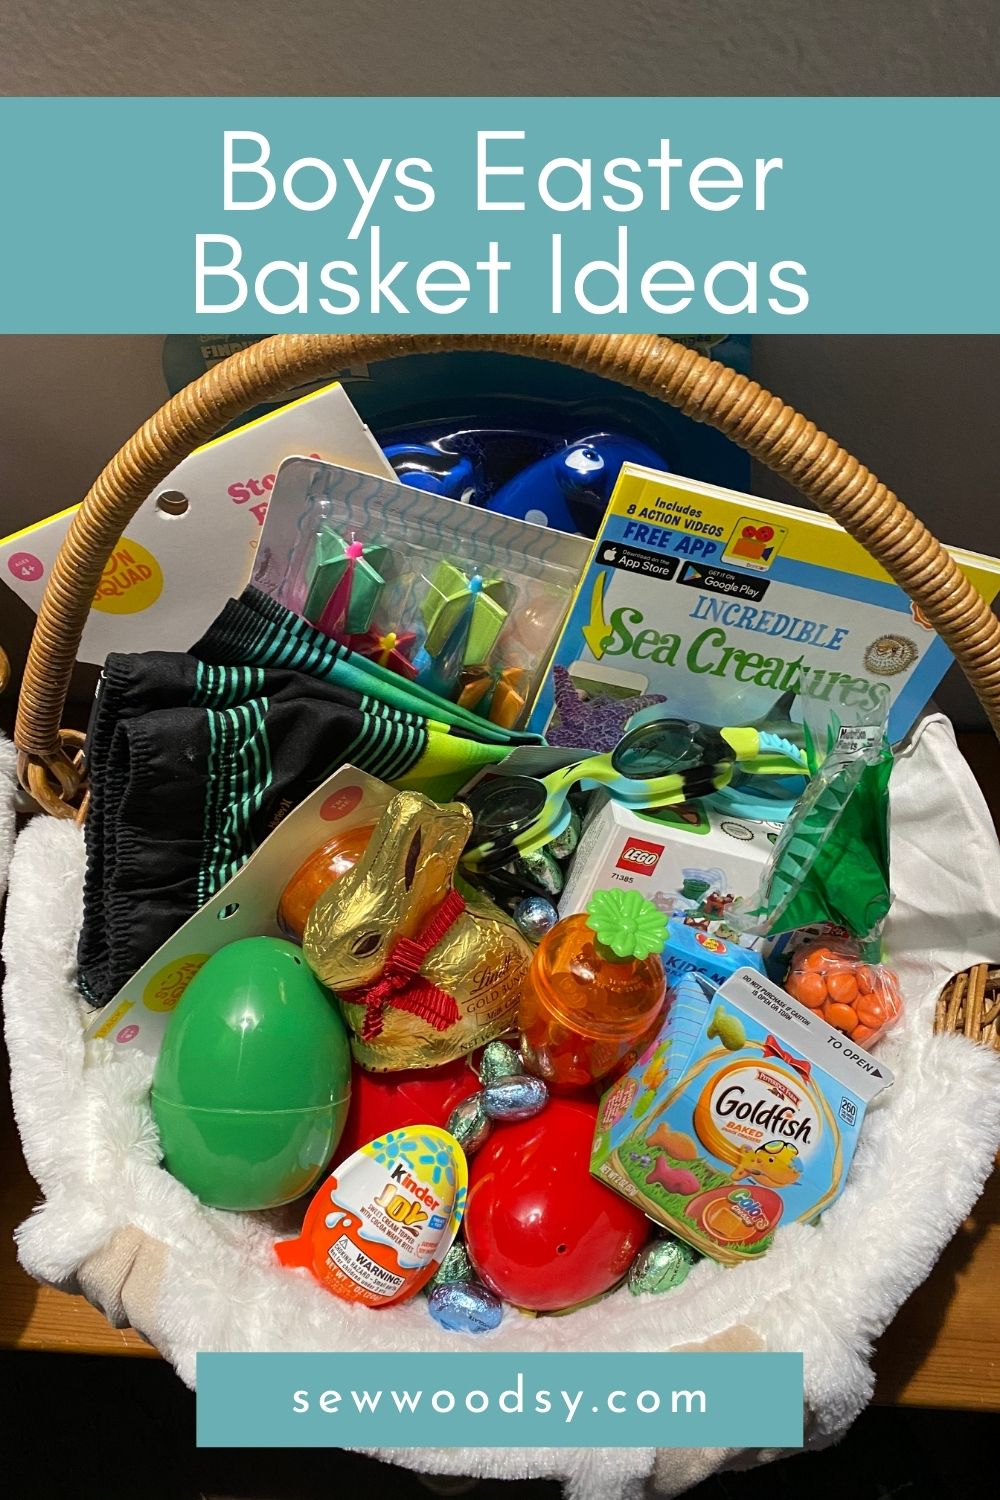 Easter basket filled with chocolate bunny, toys, and books with text on image for Pinterest.